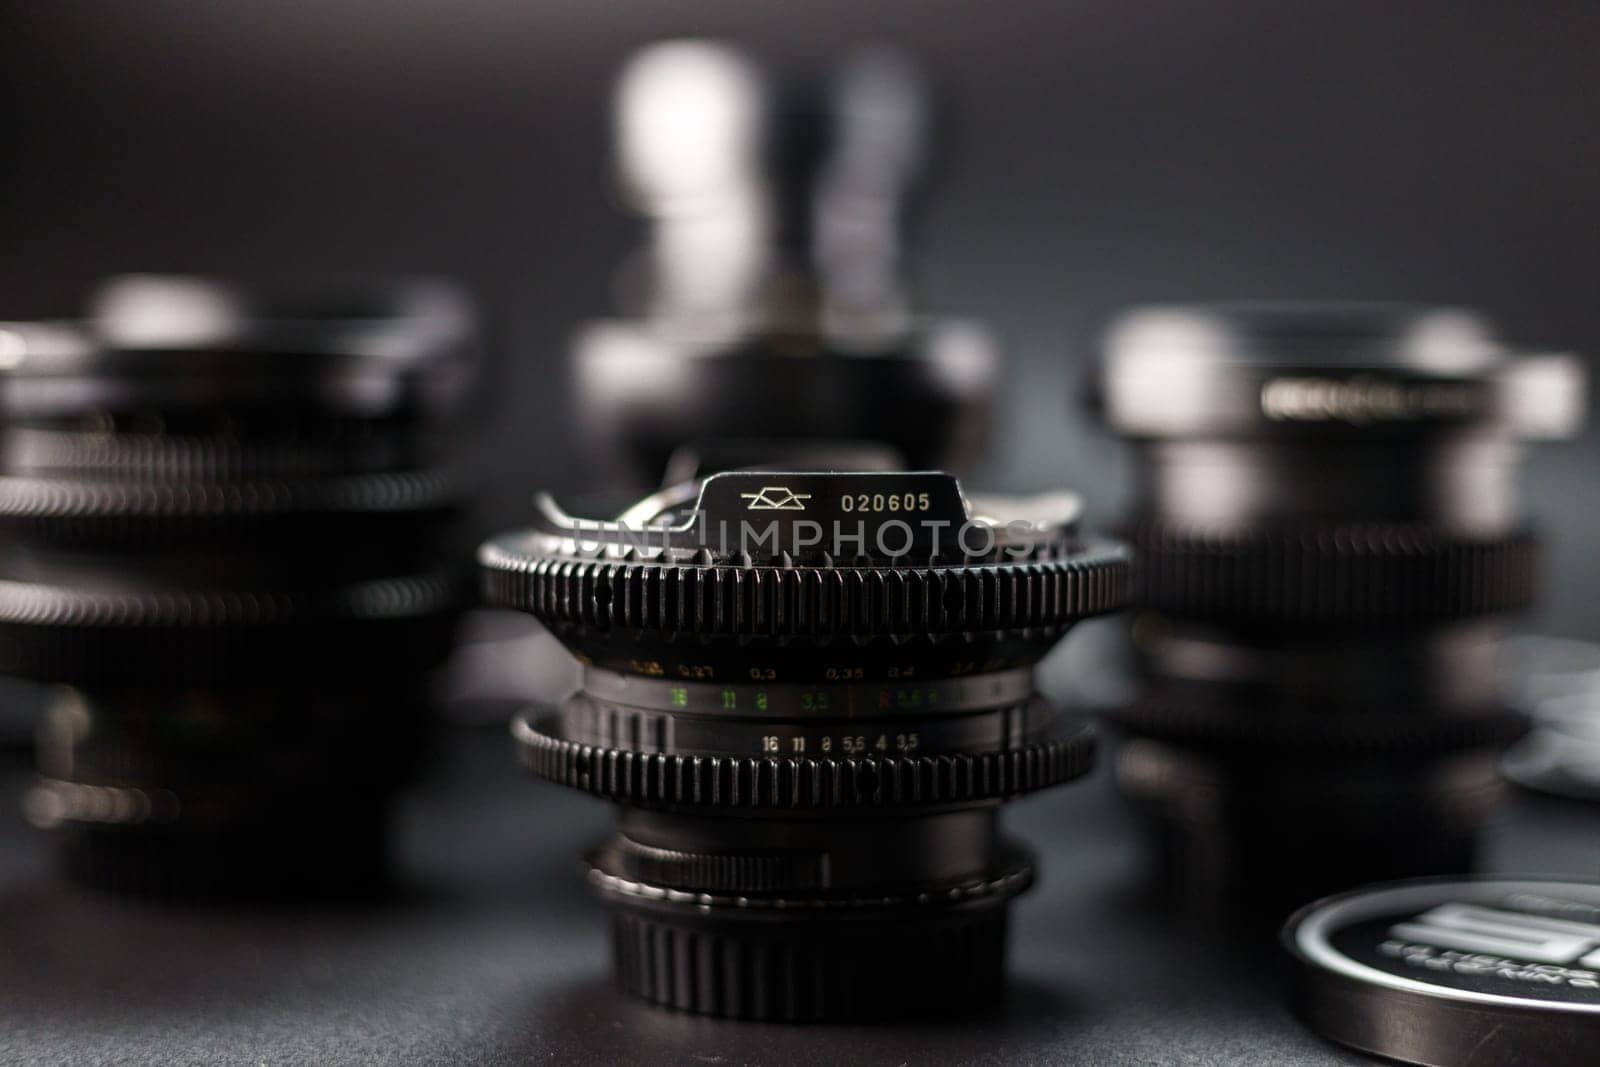 Selective focus on a vintage camera lens with serial number, surrounded by blur of other lenses, photography equipment array, black background setting by mosfet_ua